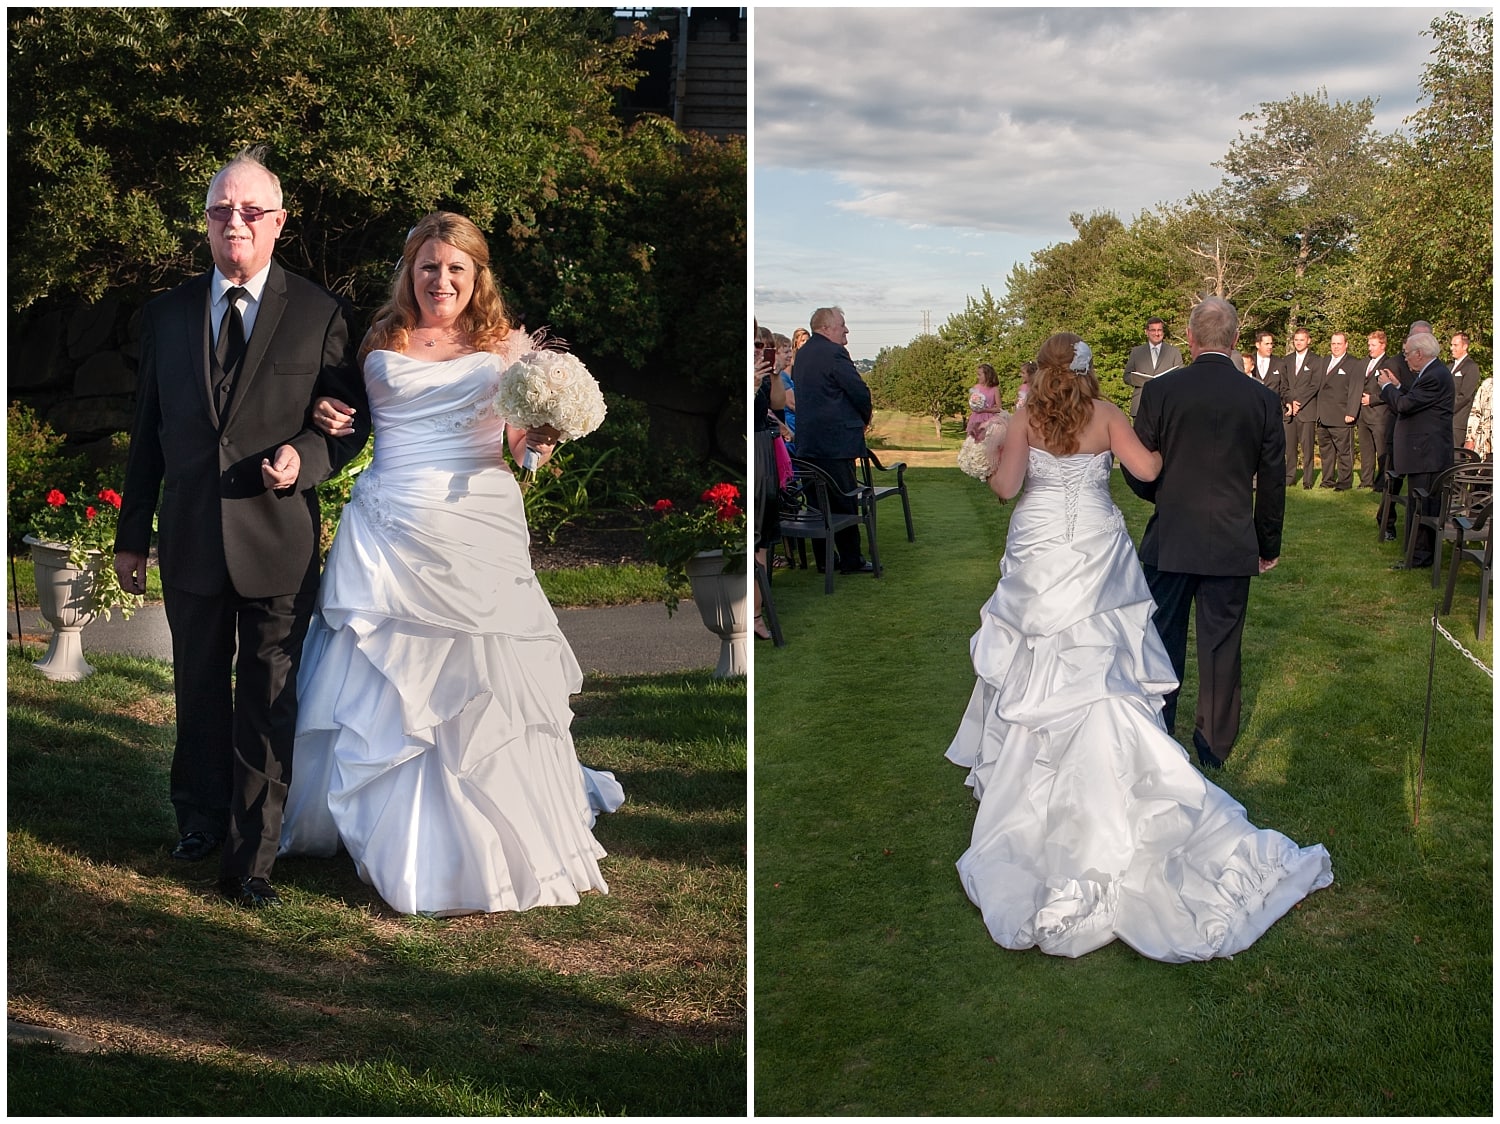 The father of the bride walks her up the aisle during her wedding ceremony at the Ashburn Golf Club in Halifax.